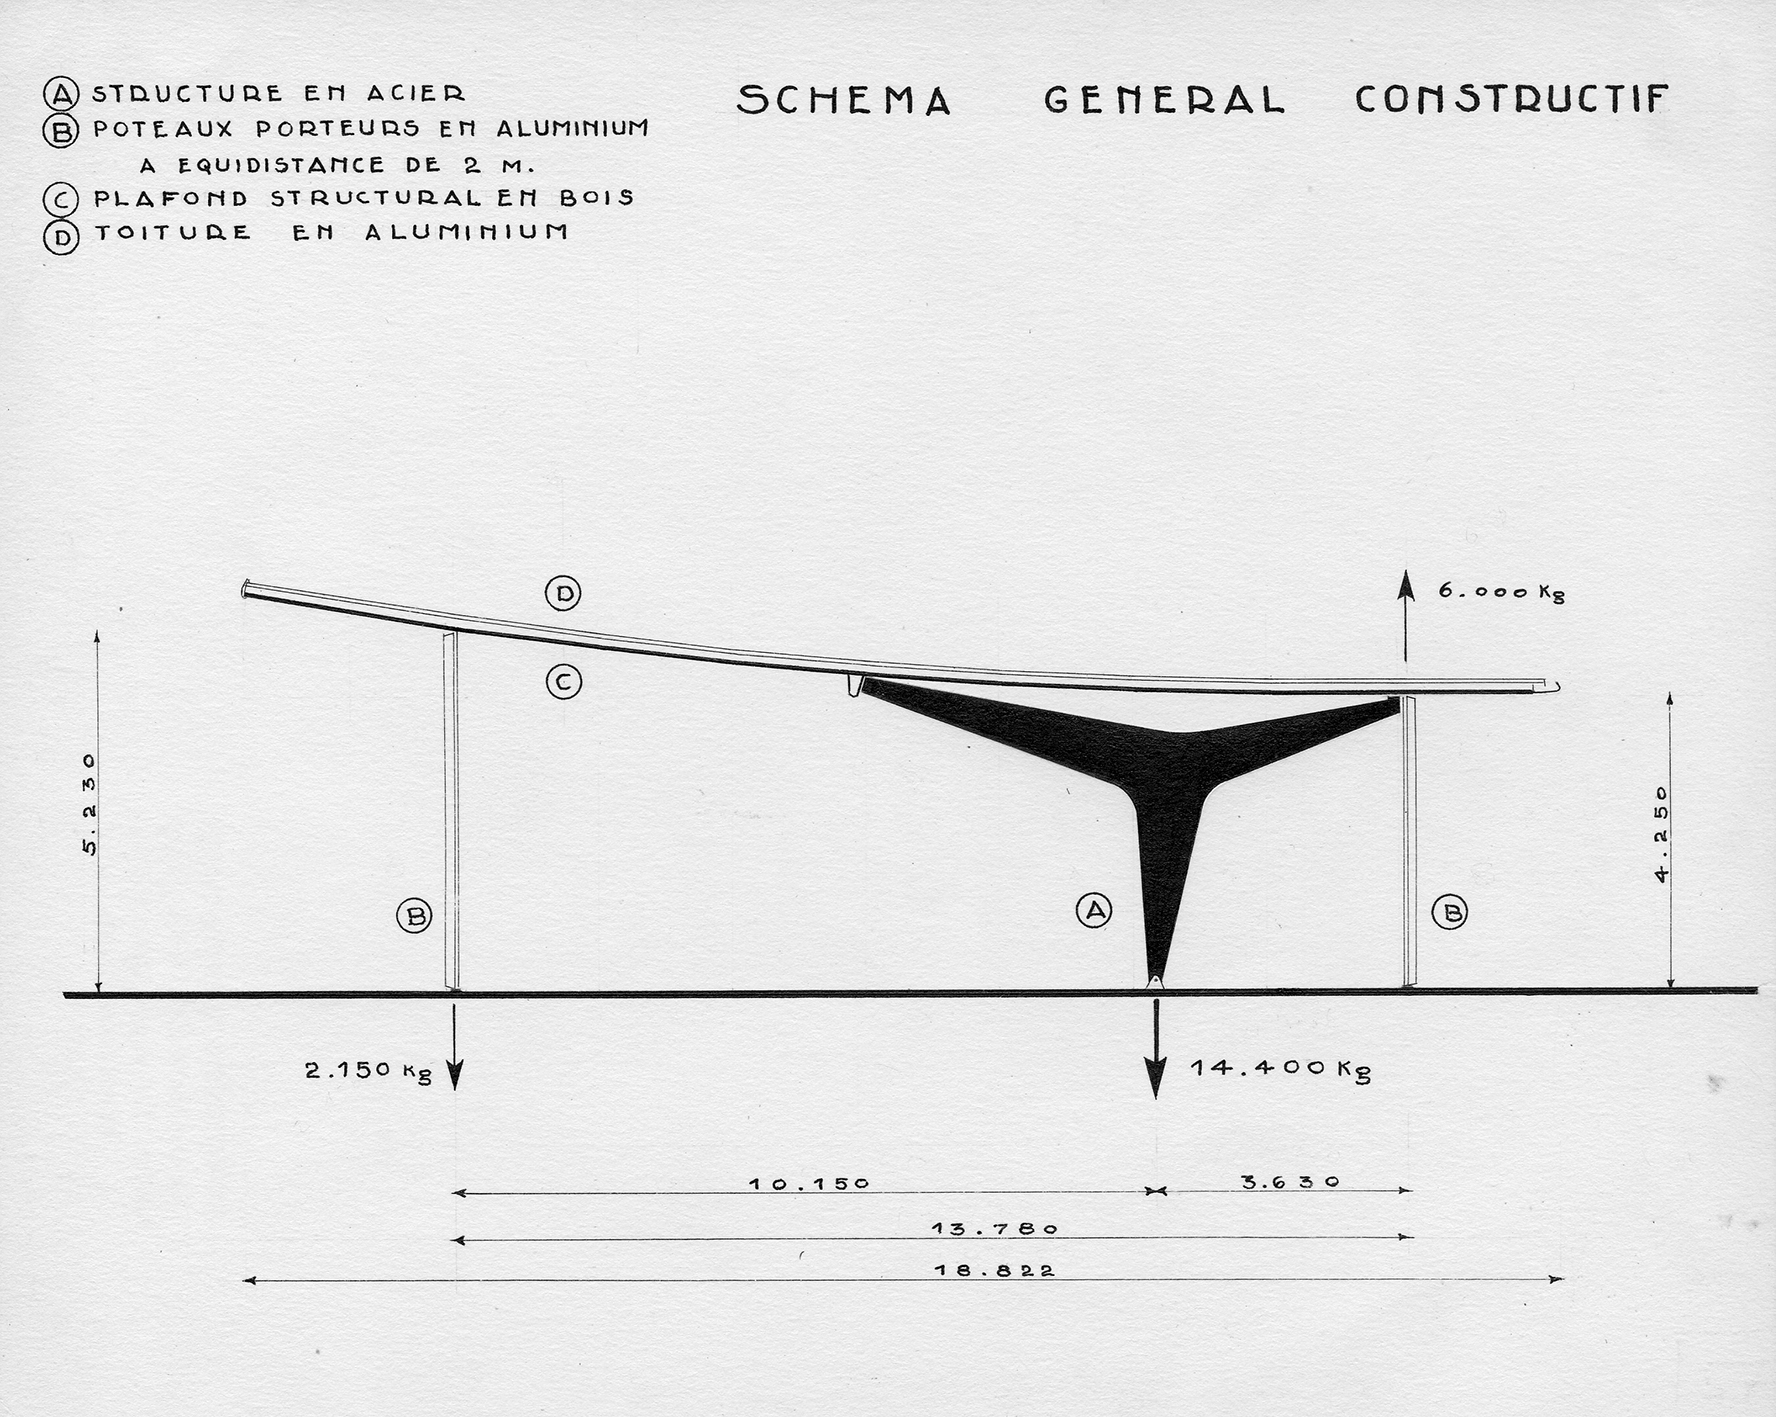 Cachat mineral water pump room, Évian, 1956 (Jean Prouvé, with architect M. Novarina, engineer S. Ketoff). Sketch by Jean Prouvé, cross-section.